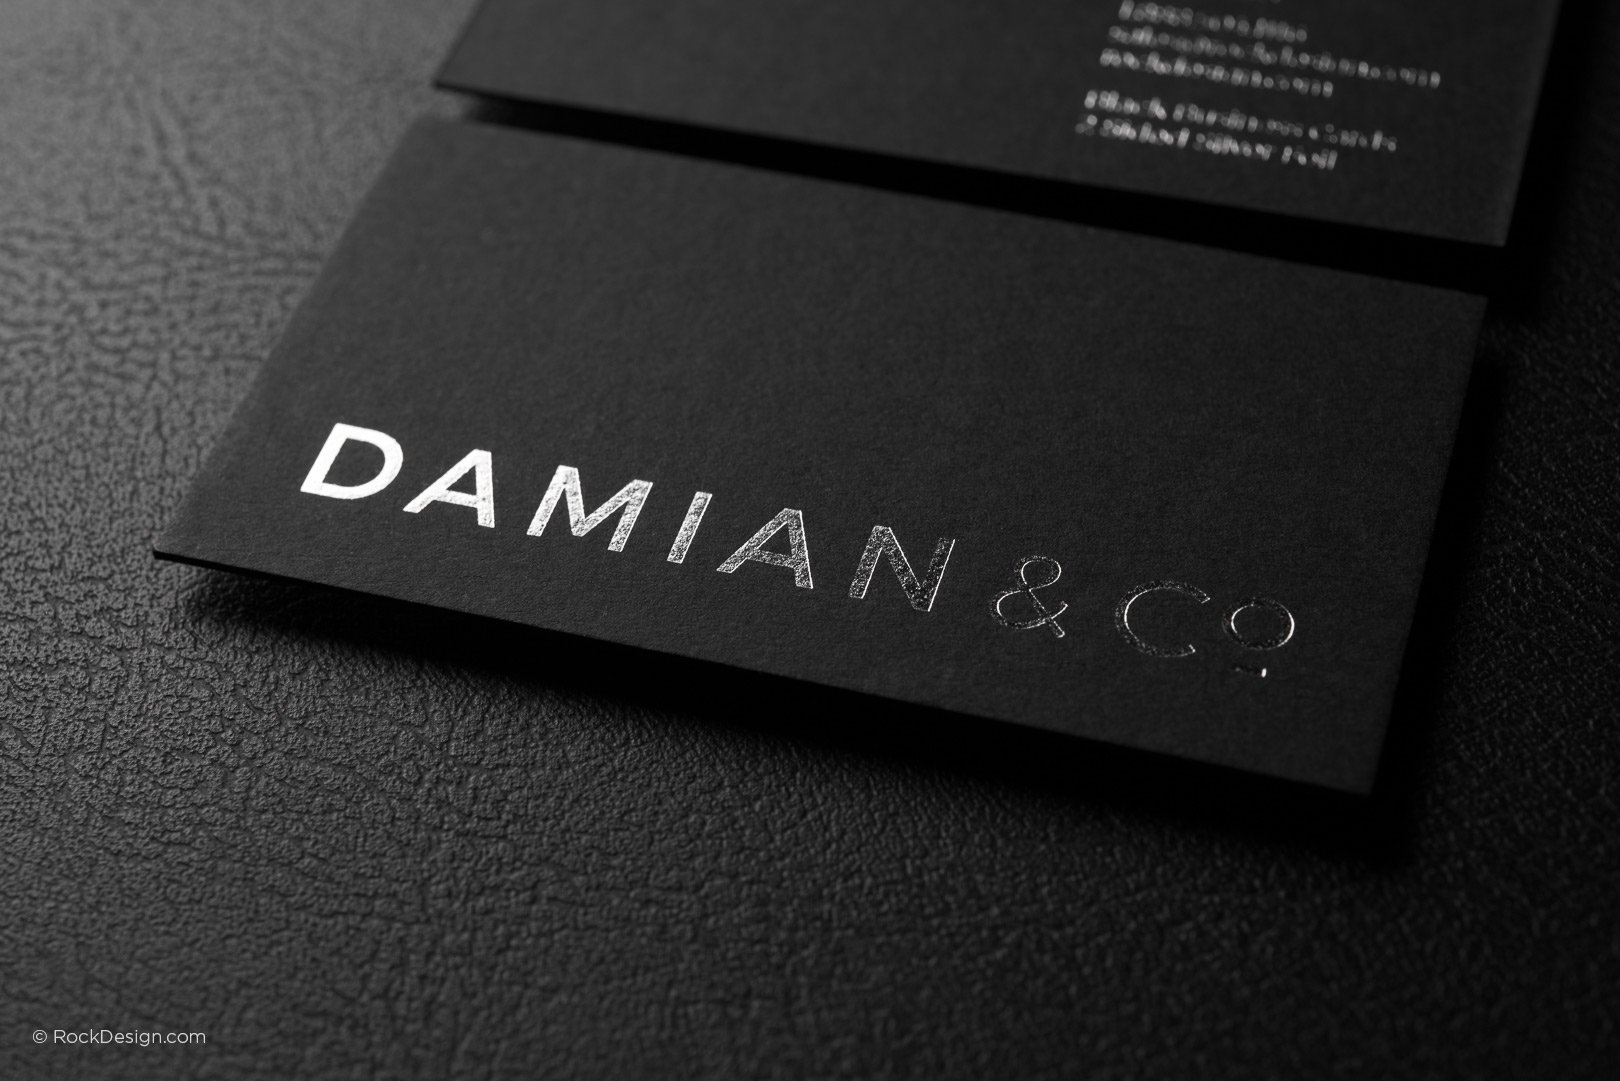 Luxury Business Cards + FREE Business Card Templates - RockDesign